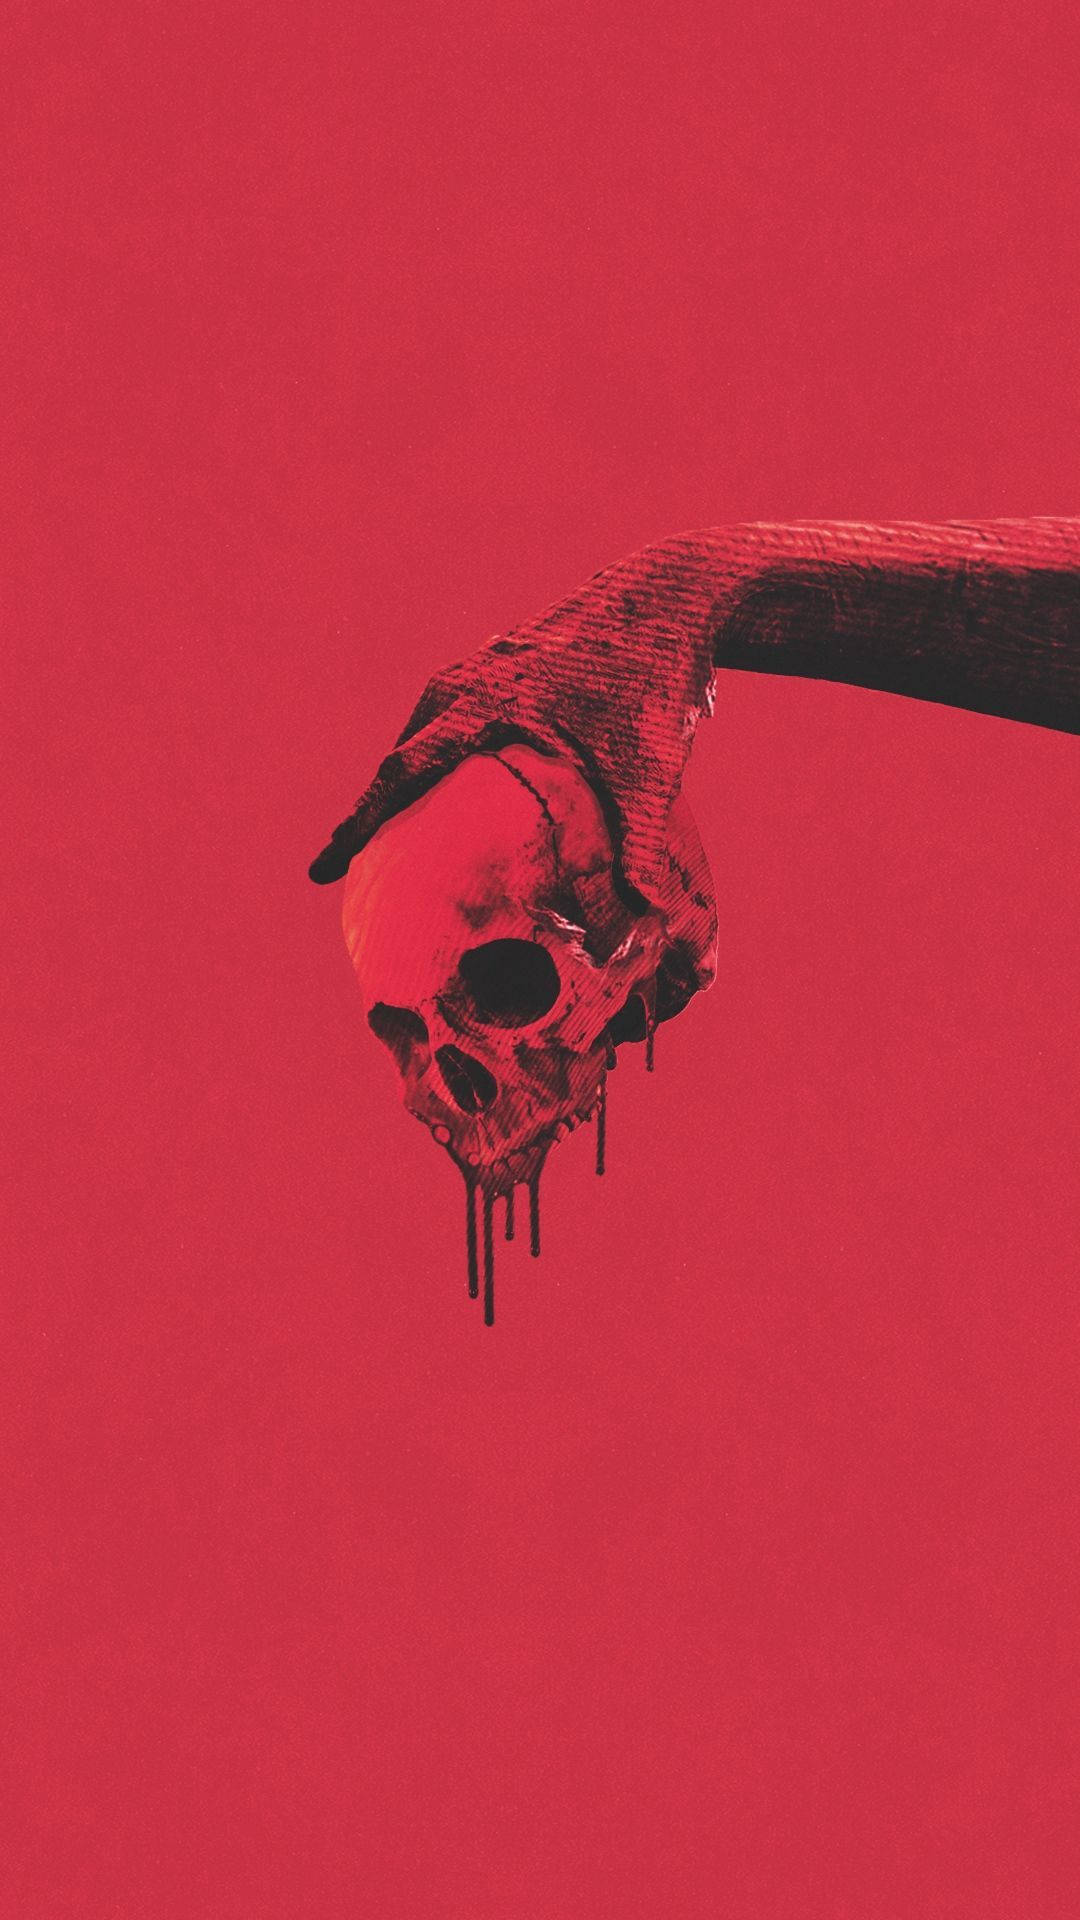 Download Red And Black Aesthetic Skull Wallpaper